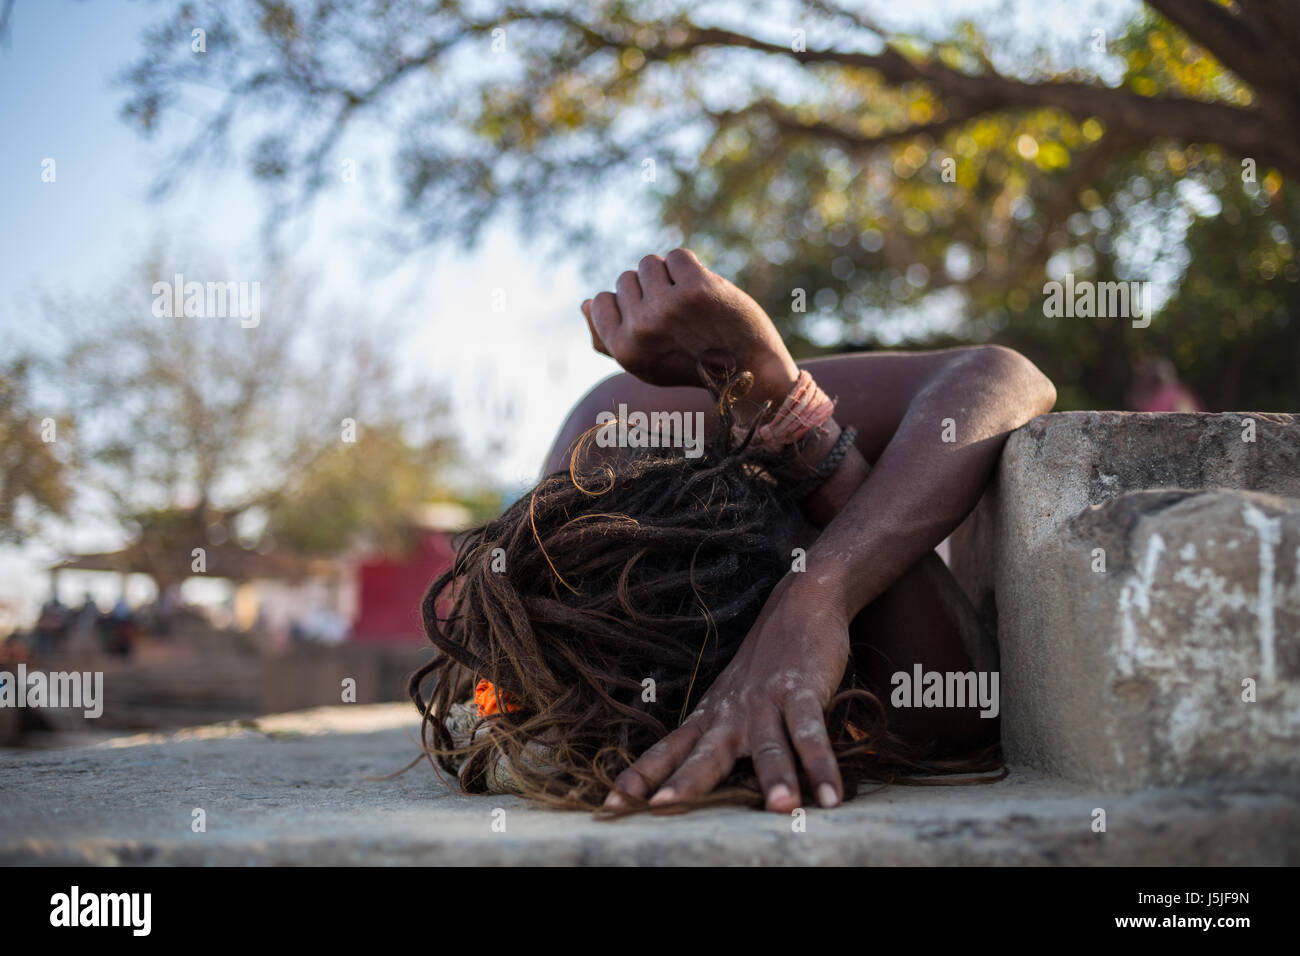 An Indian man taking a nap during the hot hours. Stock Photo